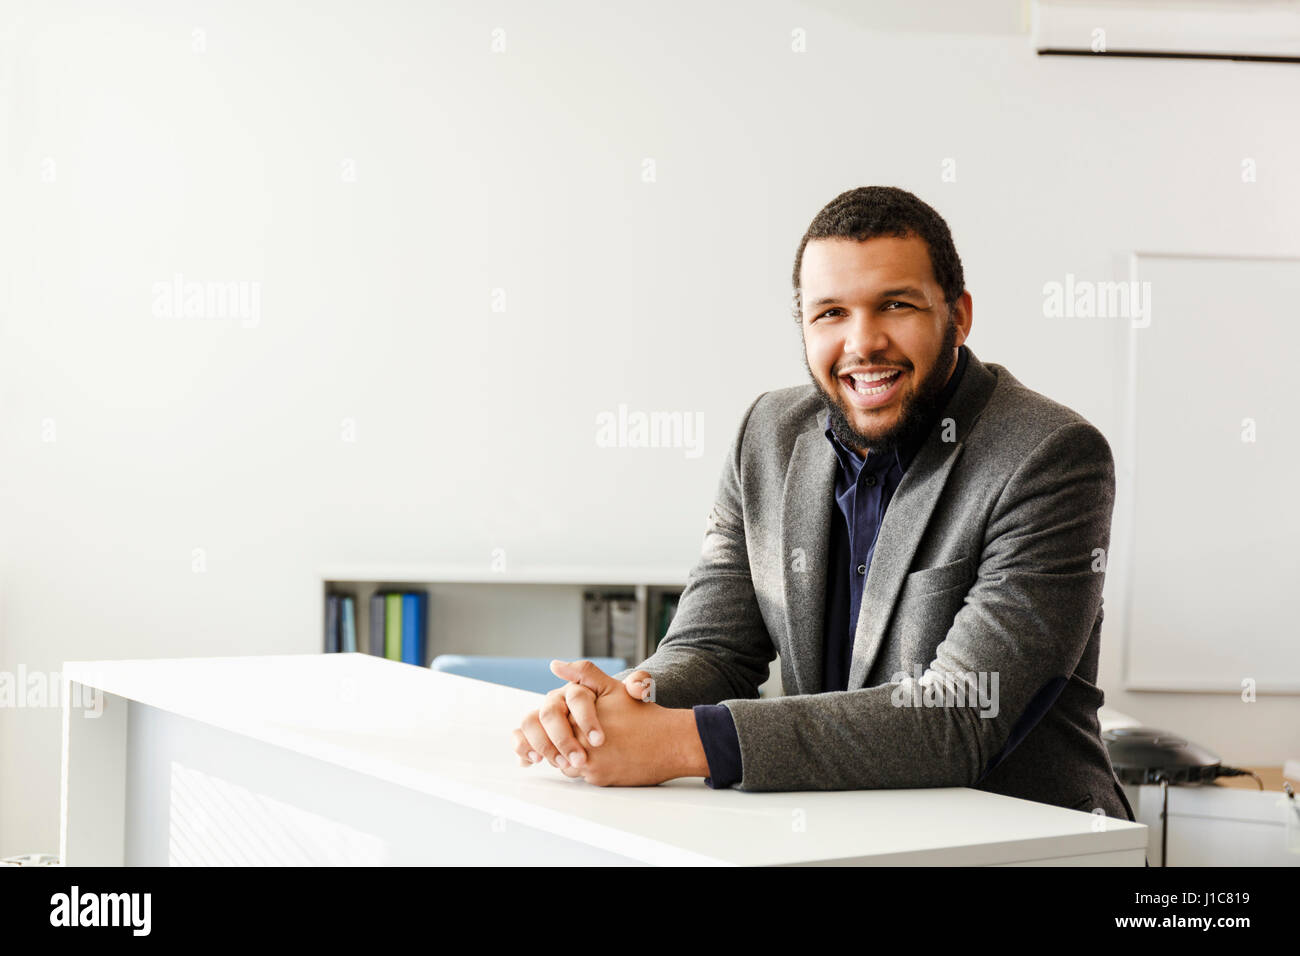 Mixed Race man smiling in office Stock Photo